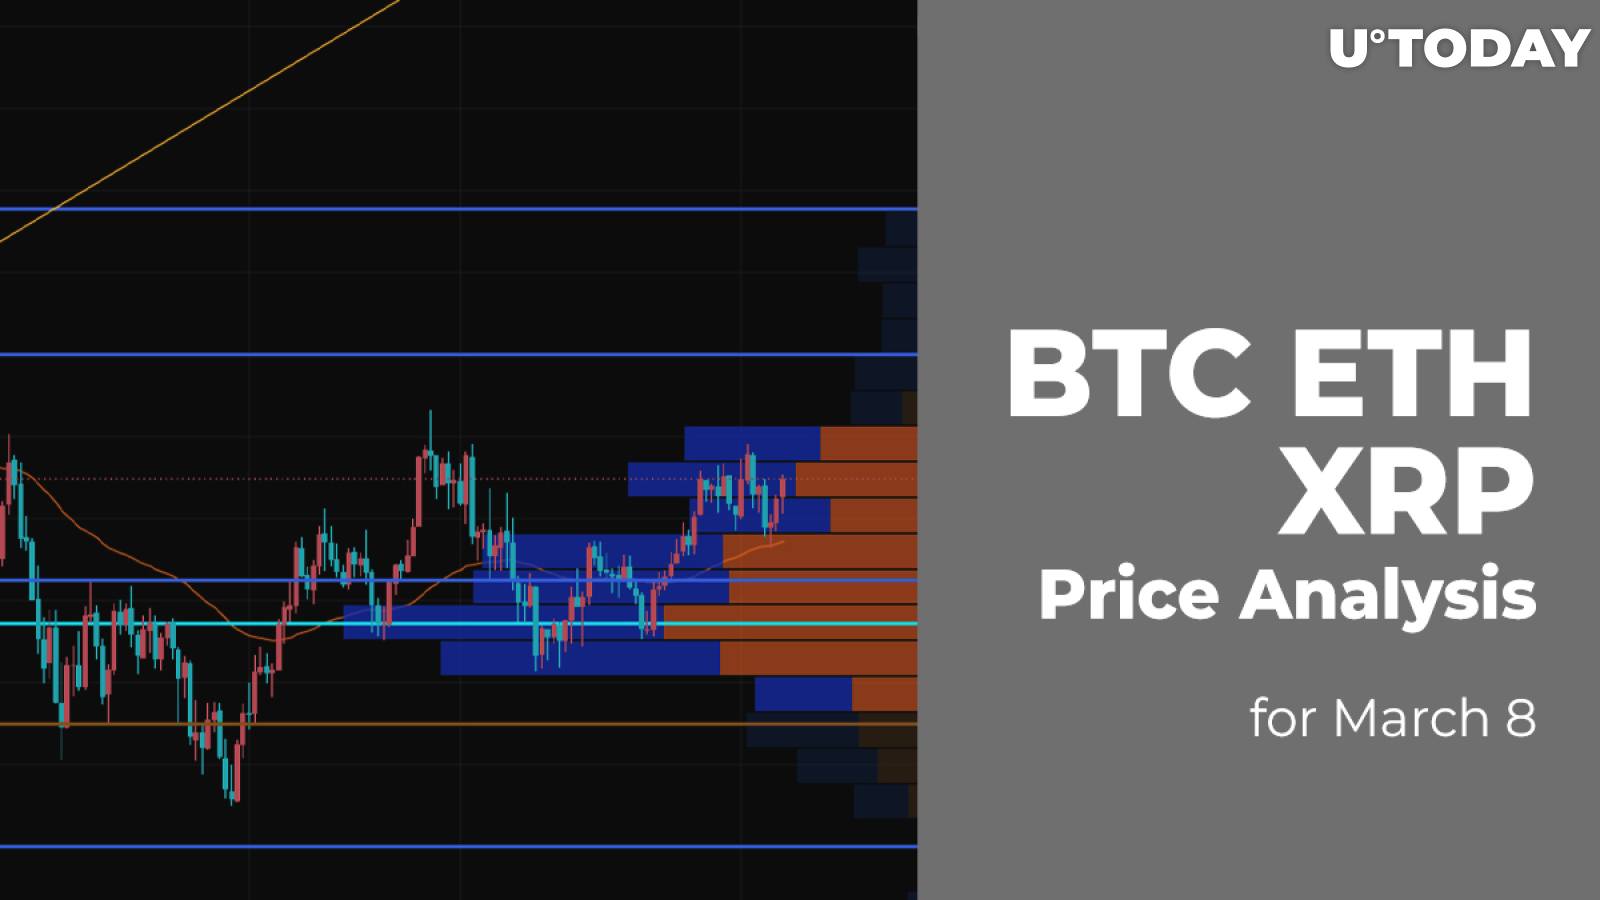 BTC, ETH and XRP Price Analysis for March 8